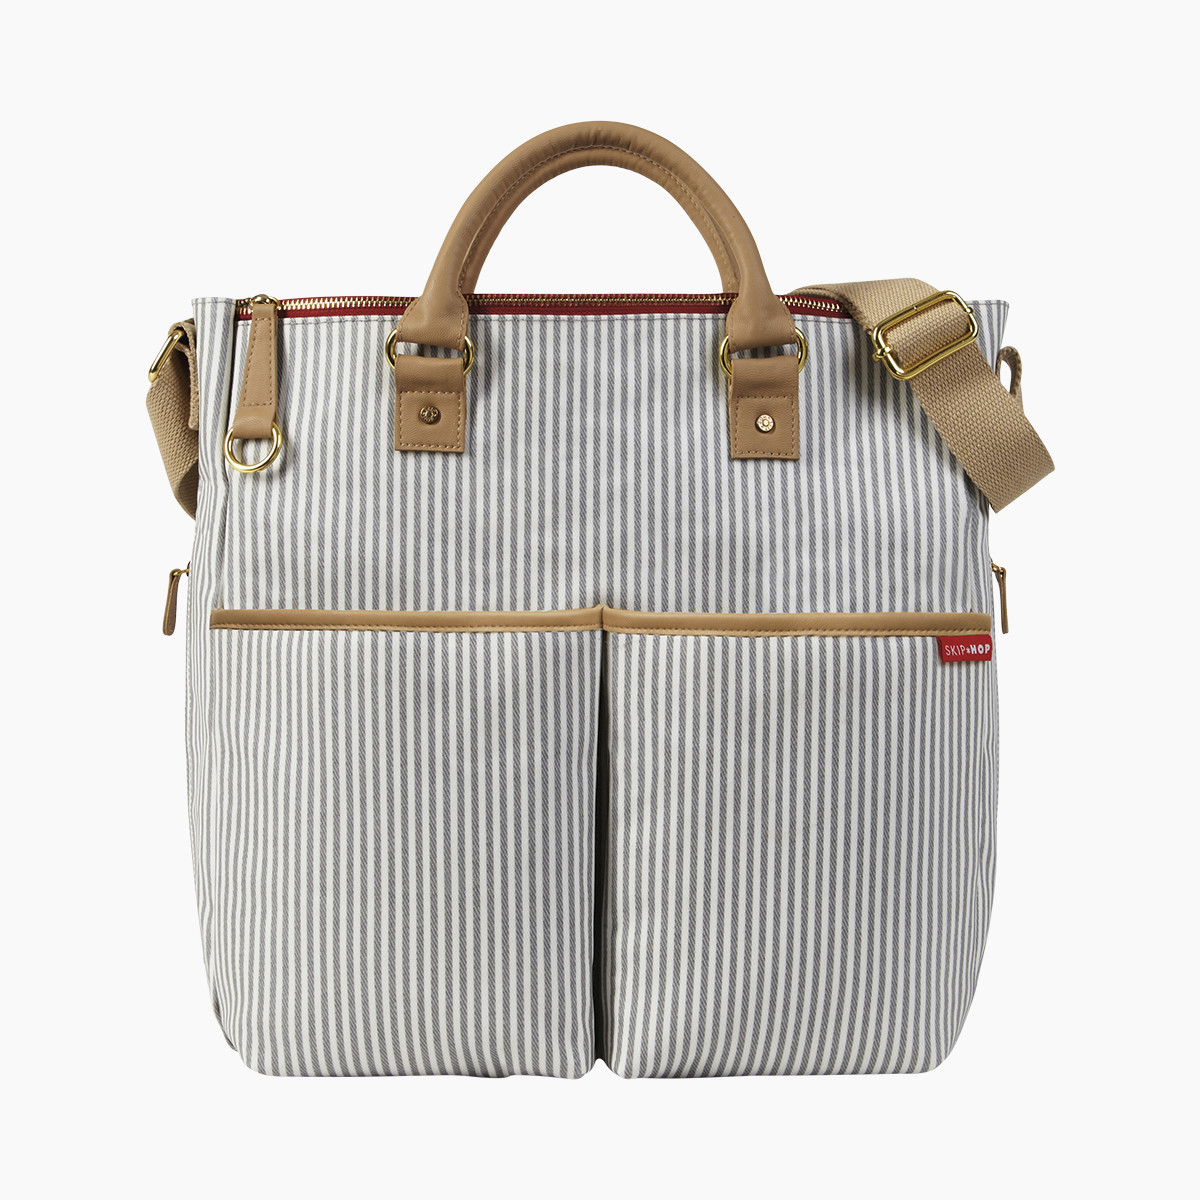 Skip Hop Duo Special Edition Diaper Bag - French Stripe.